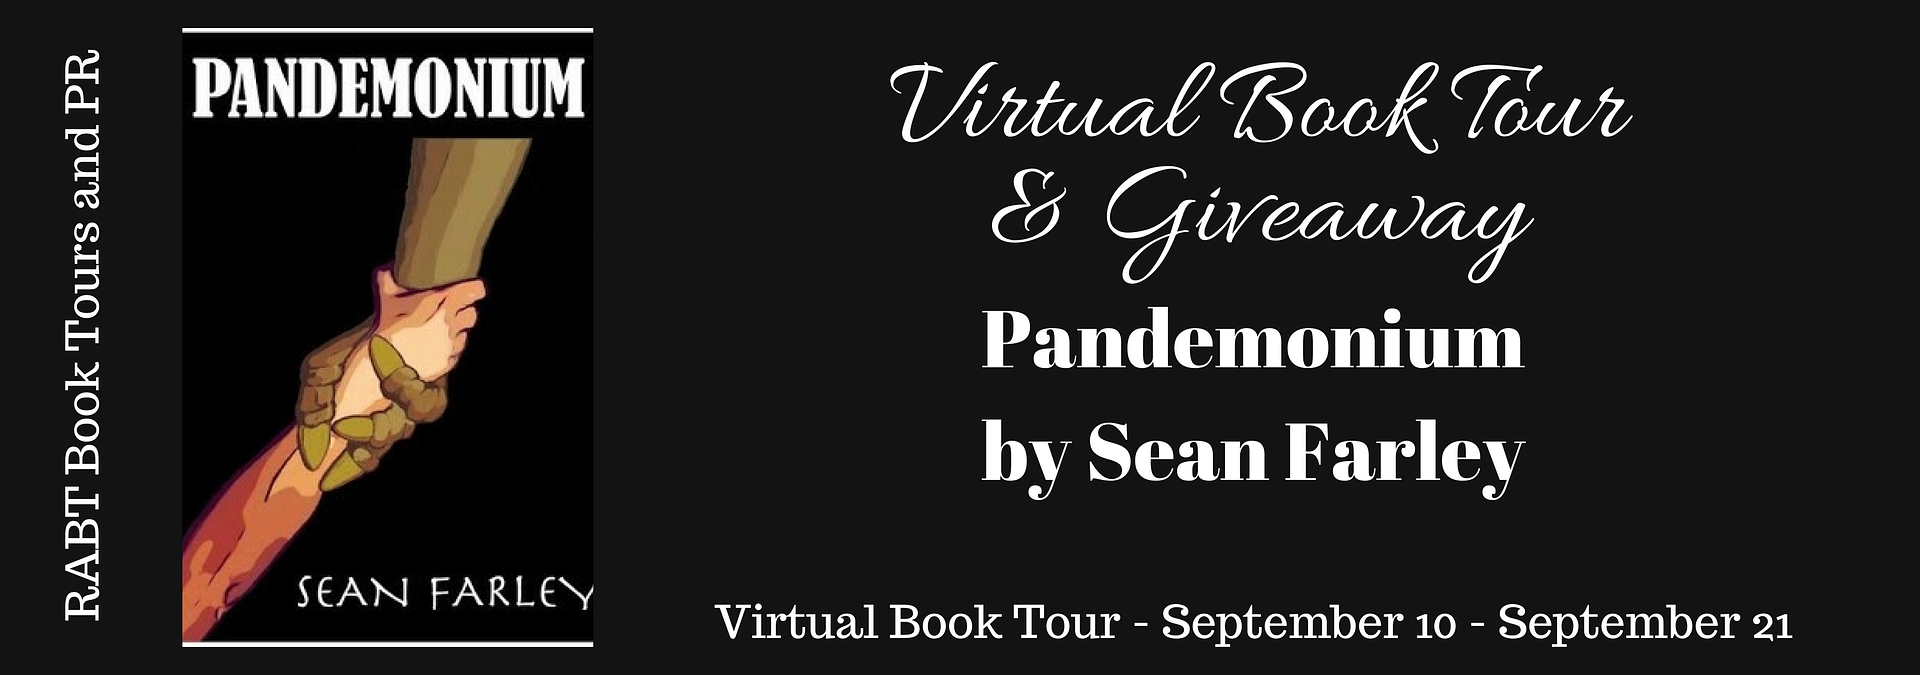 Virtual Book Tour: Pandemonium by Sean Farley @motorcitysean read an #interview with the #author and enter the #giveaway